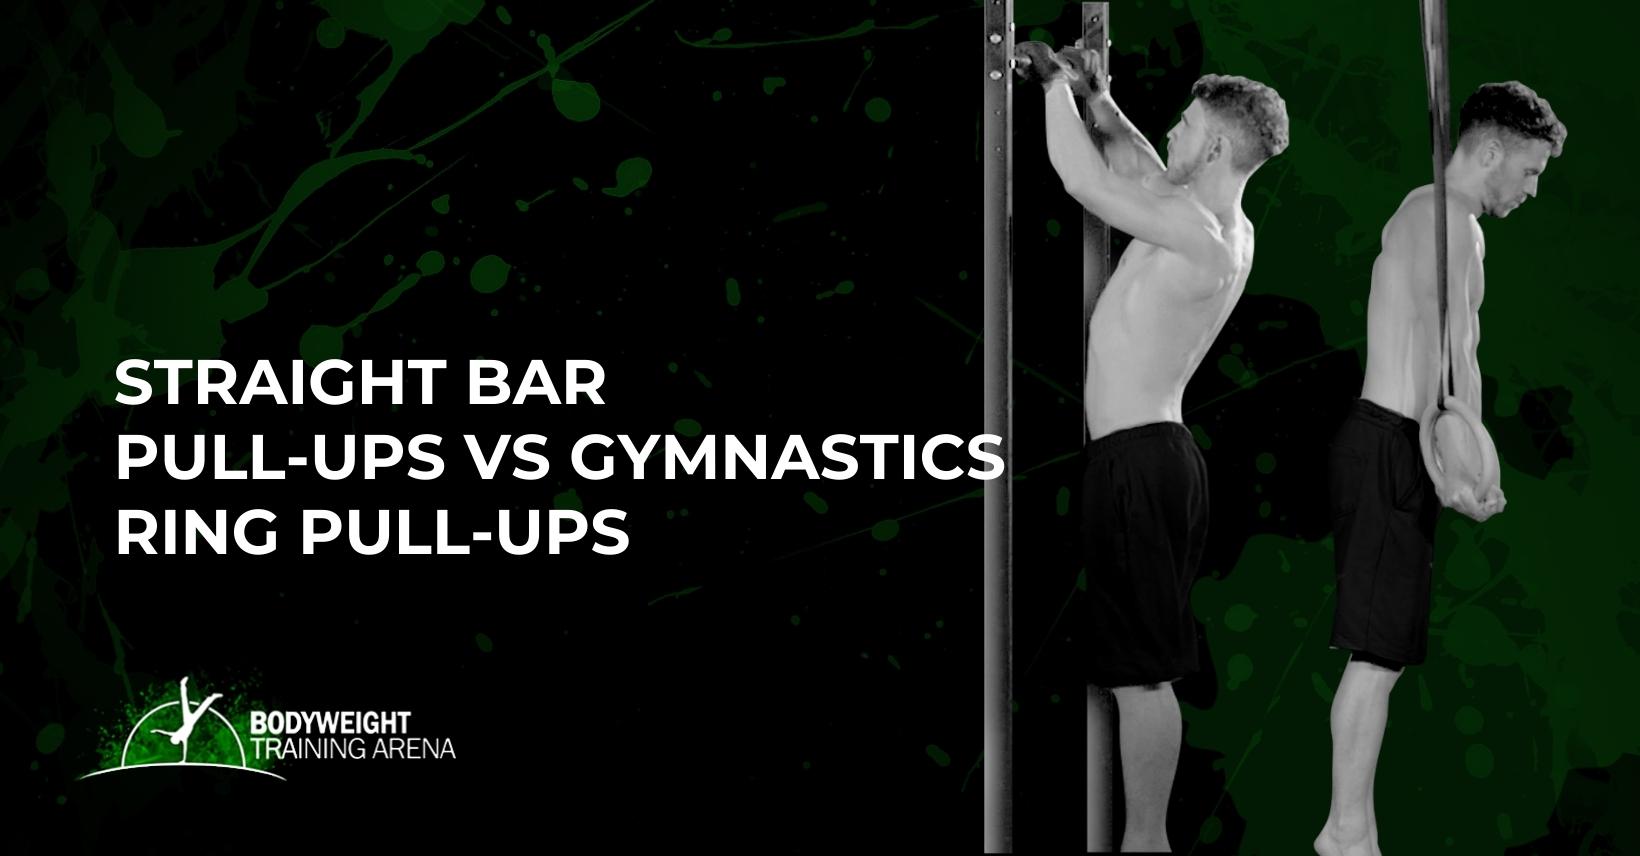 Straight bar pull-ups vs Gymnastics ring pull-ups: Which Is the Better?